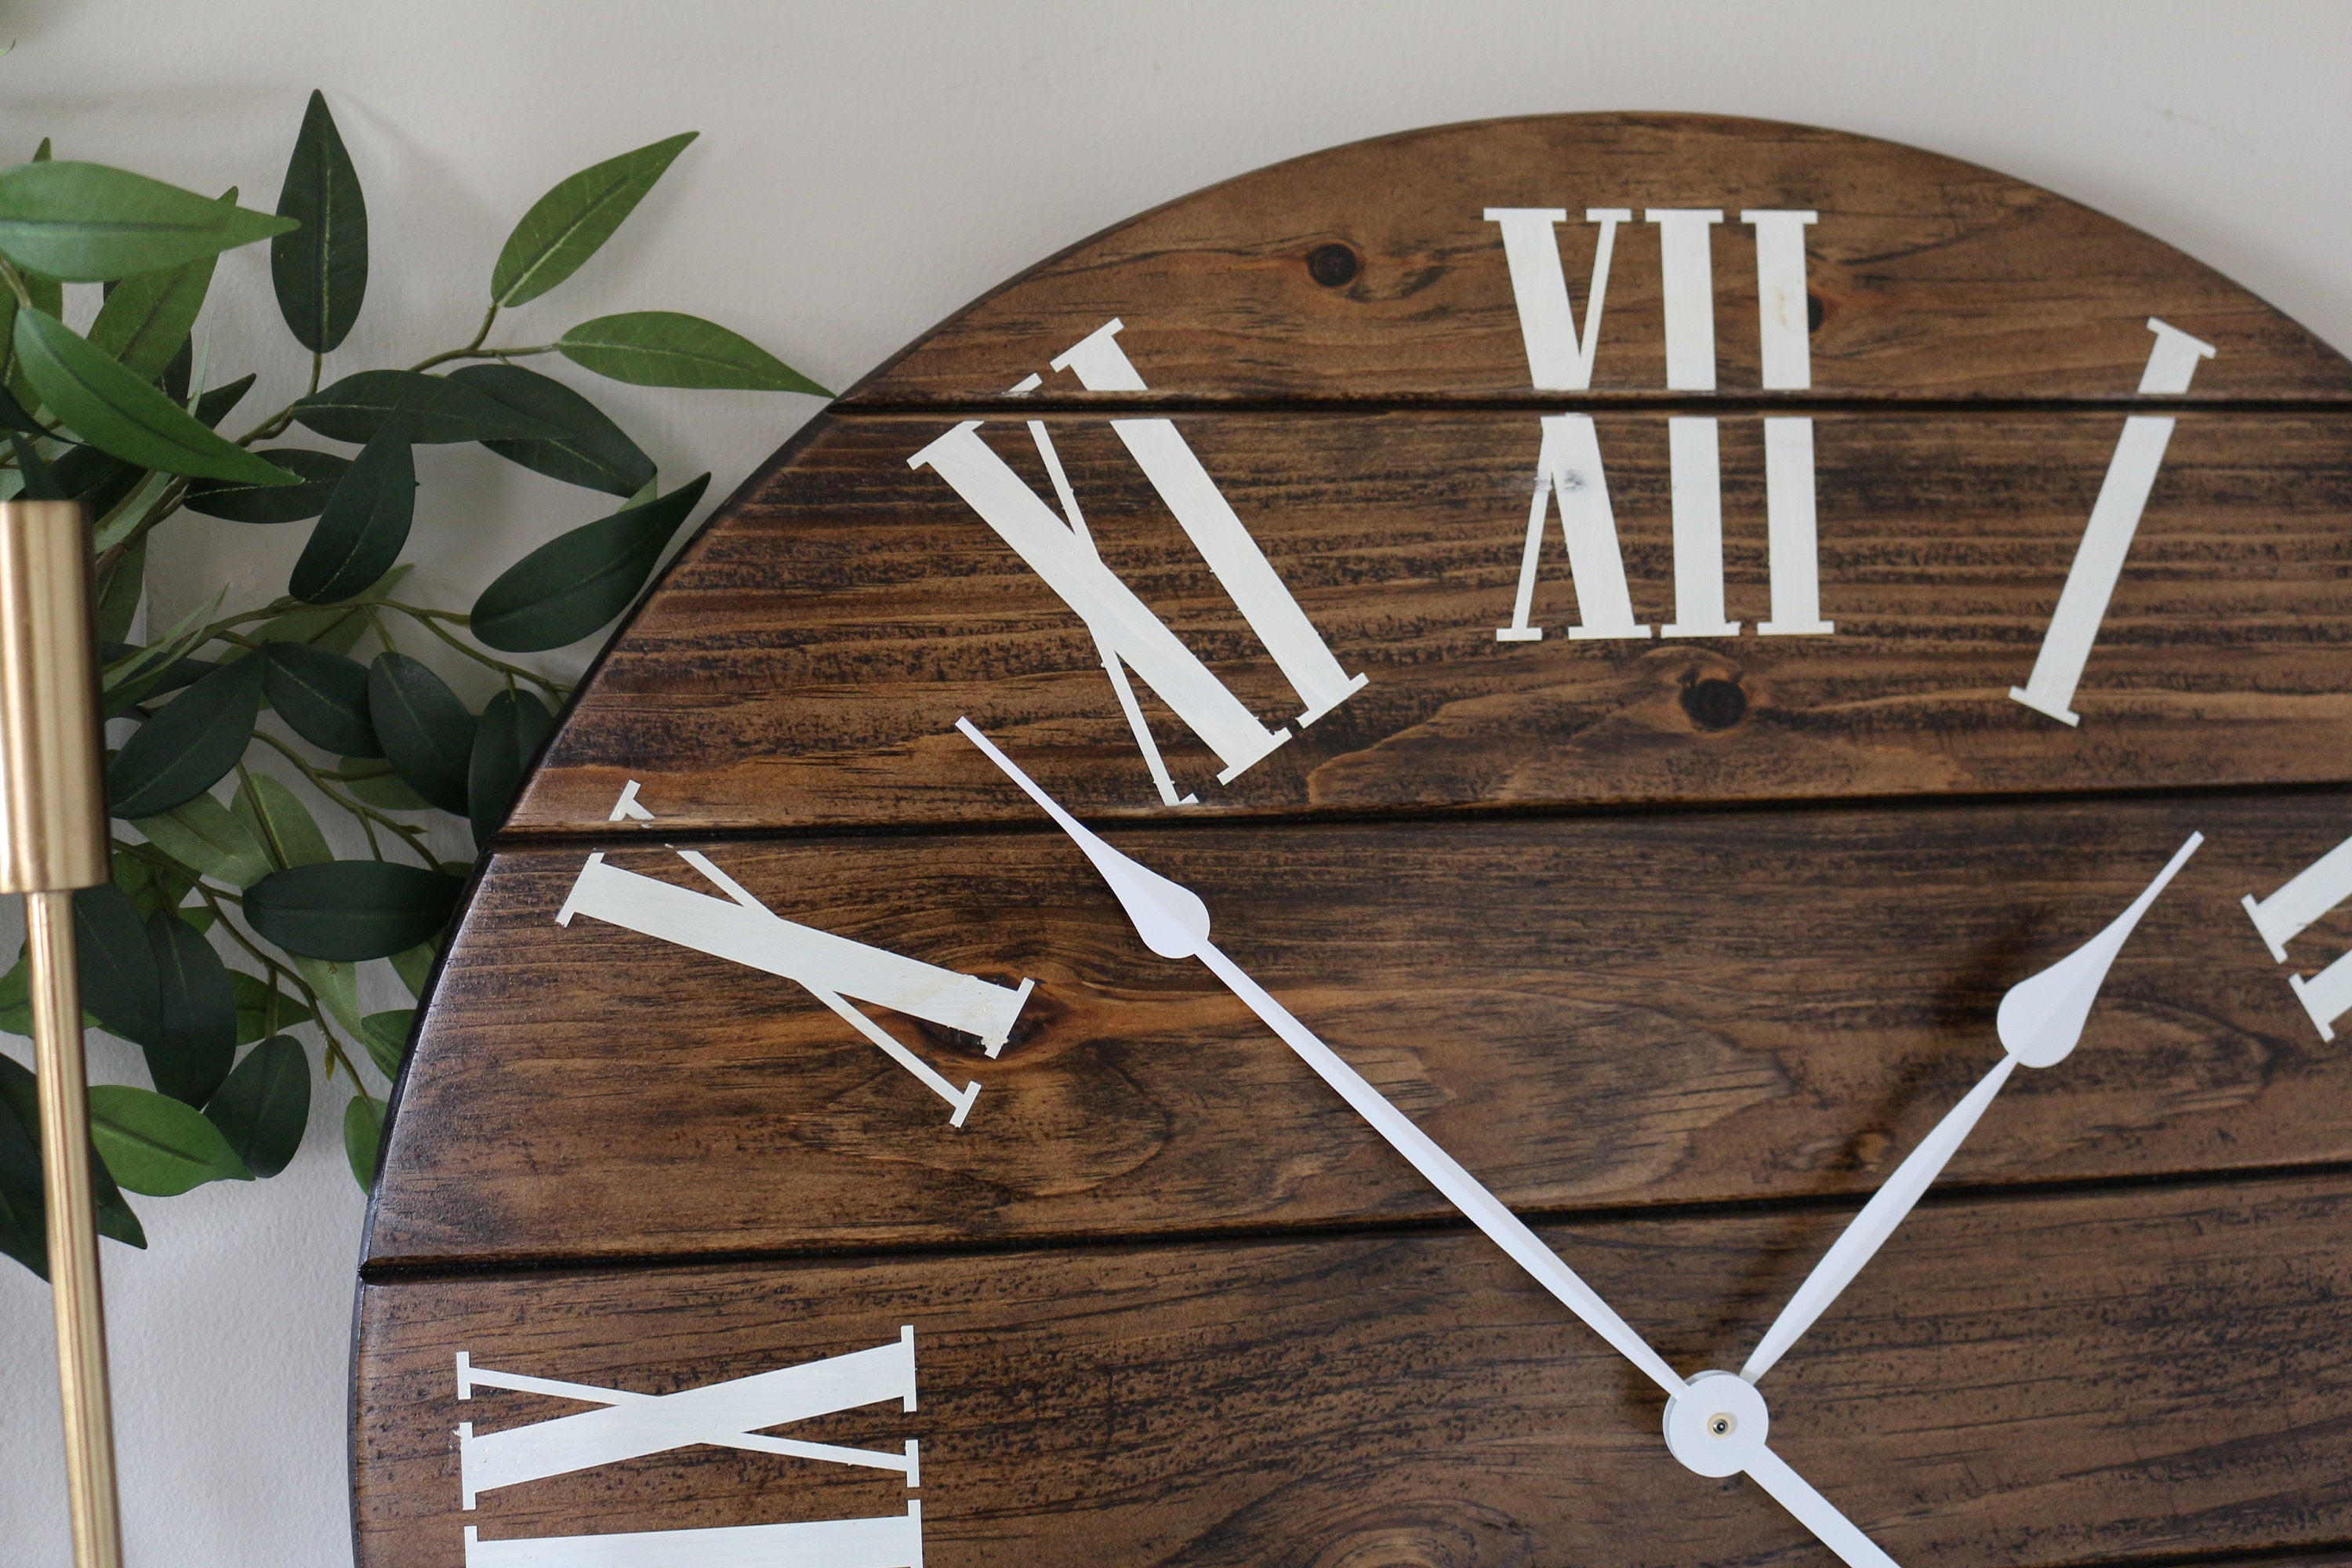 Dark Stained Large Farmhouse Wall Clock with White Roman Numerals